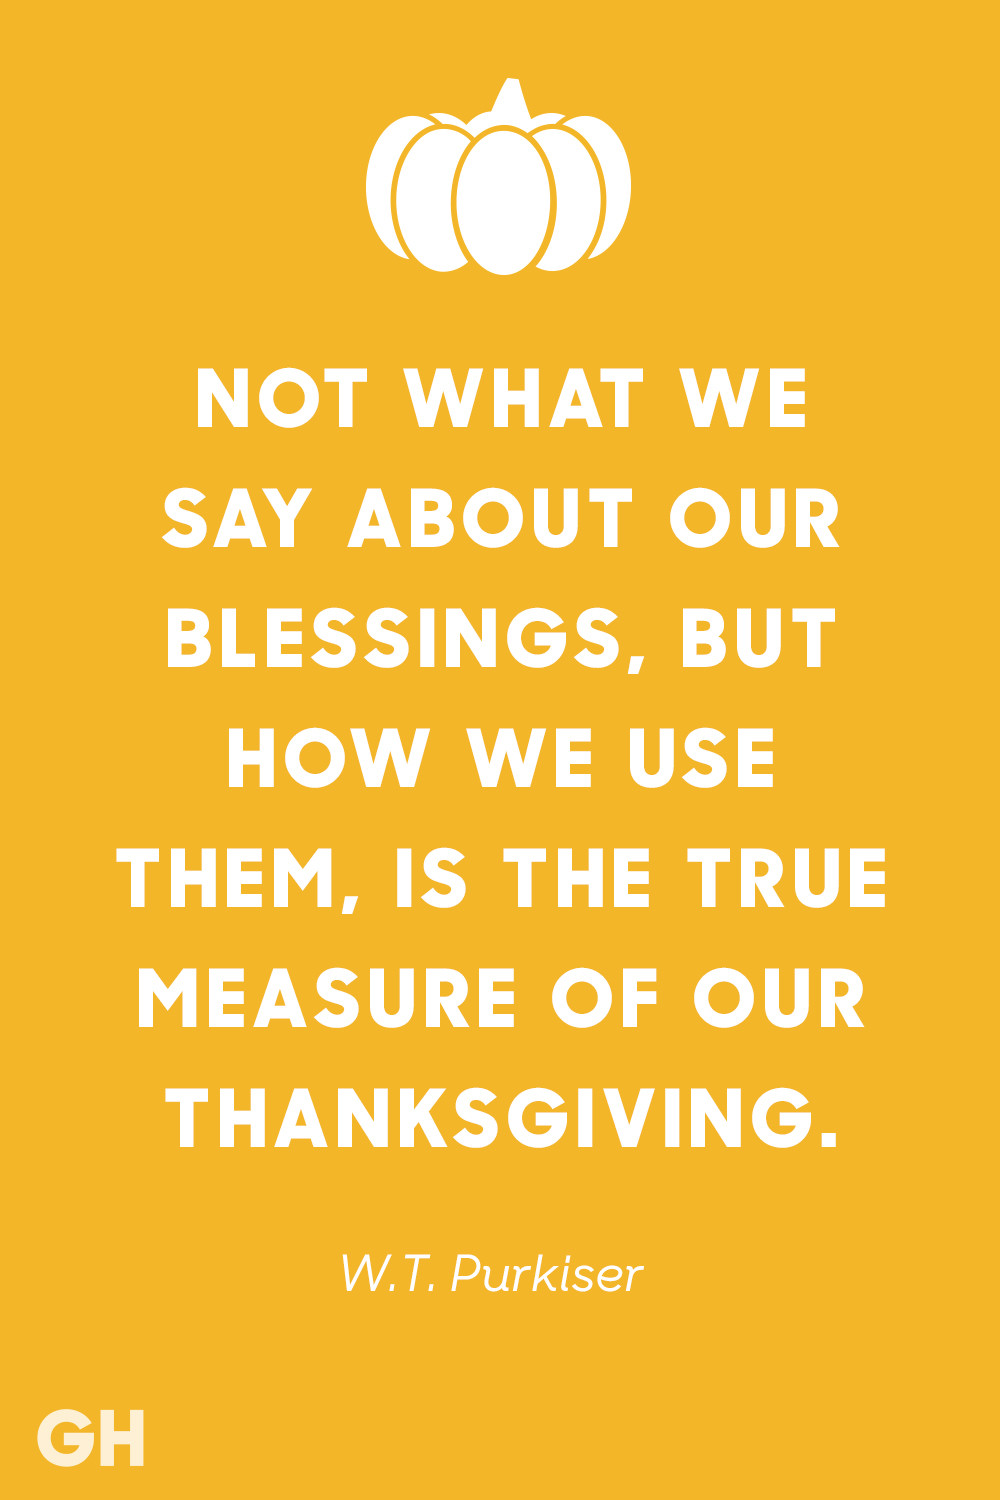 Thanksgiving Quotes Hilarious
 15 Best Thanksgiving Quotes Inspirational and Funny